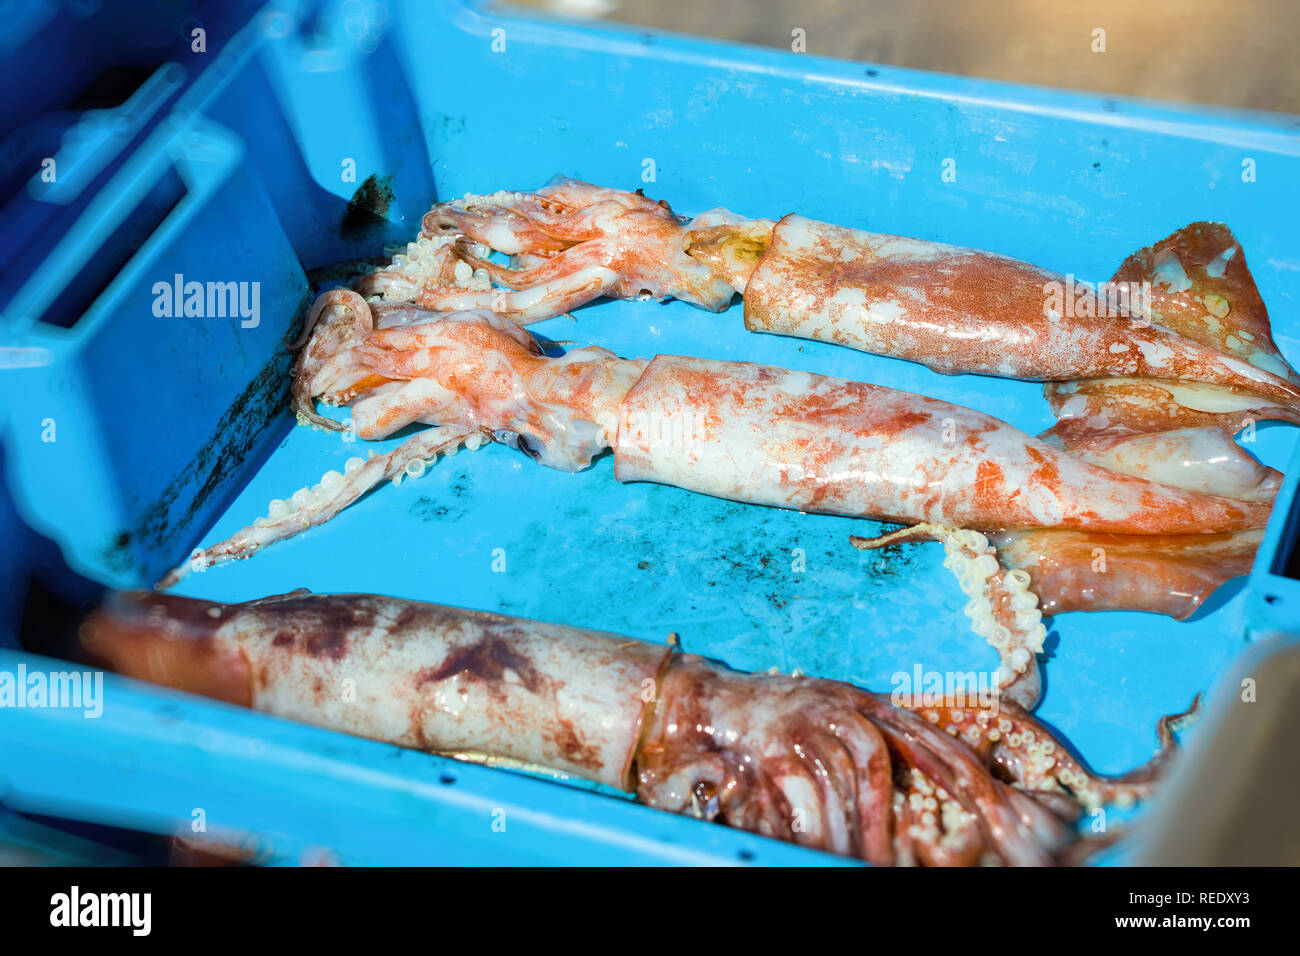 Blue plastic containers with catch of squids, kalmar, sea delicacies. Fish auction for wholesalers and restaurants. Blanes, Spain, Costa Brava. Summer Stock Photo